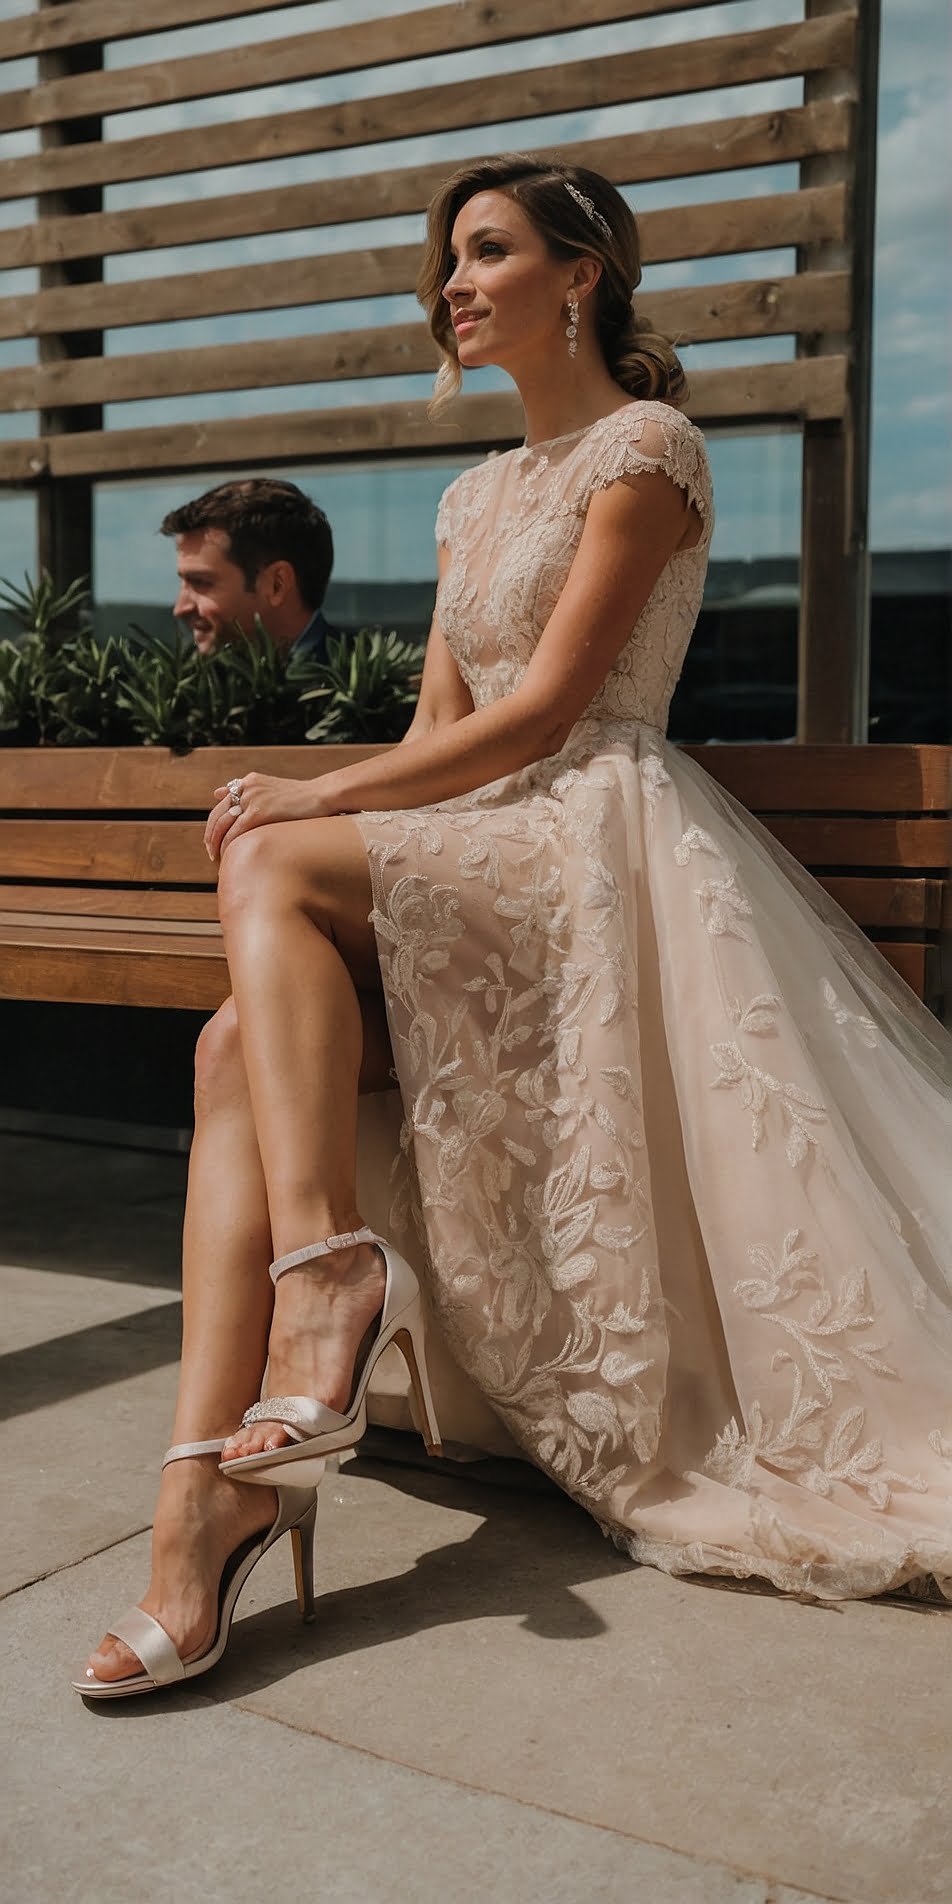 Peaches and Cream: Elegant Lace Gown with Tulle Overlay